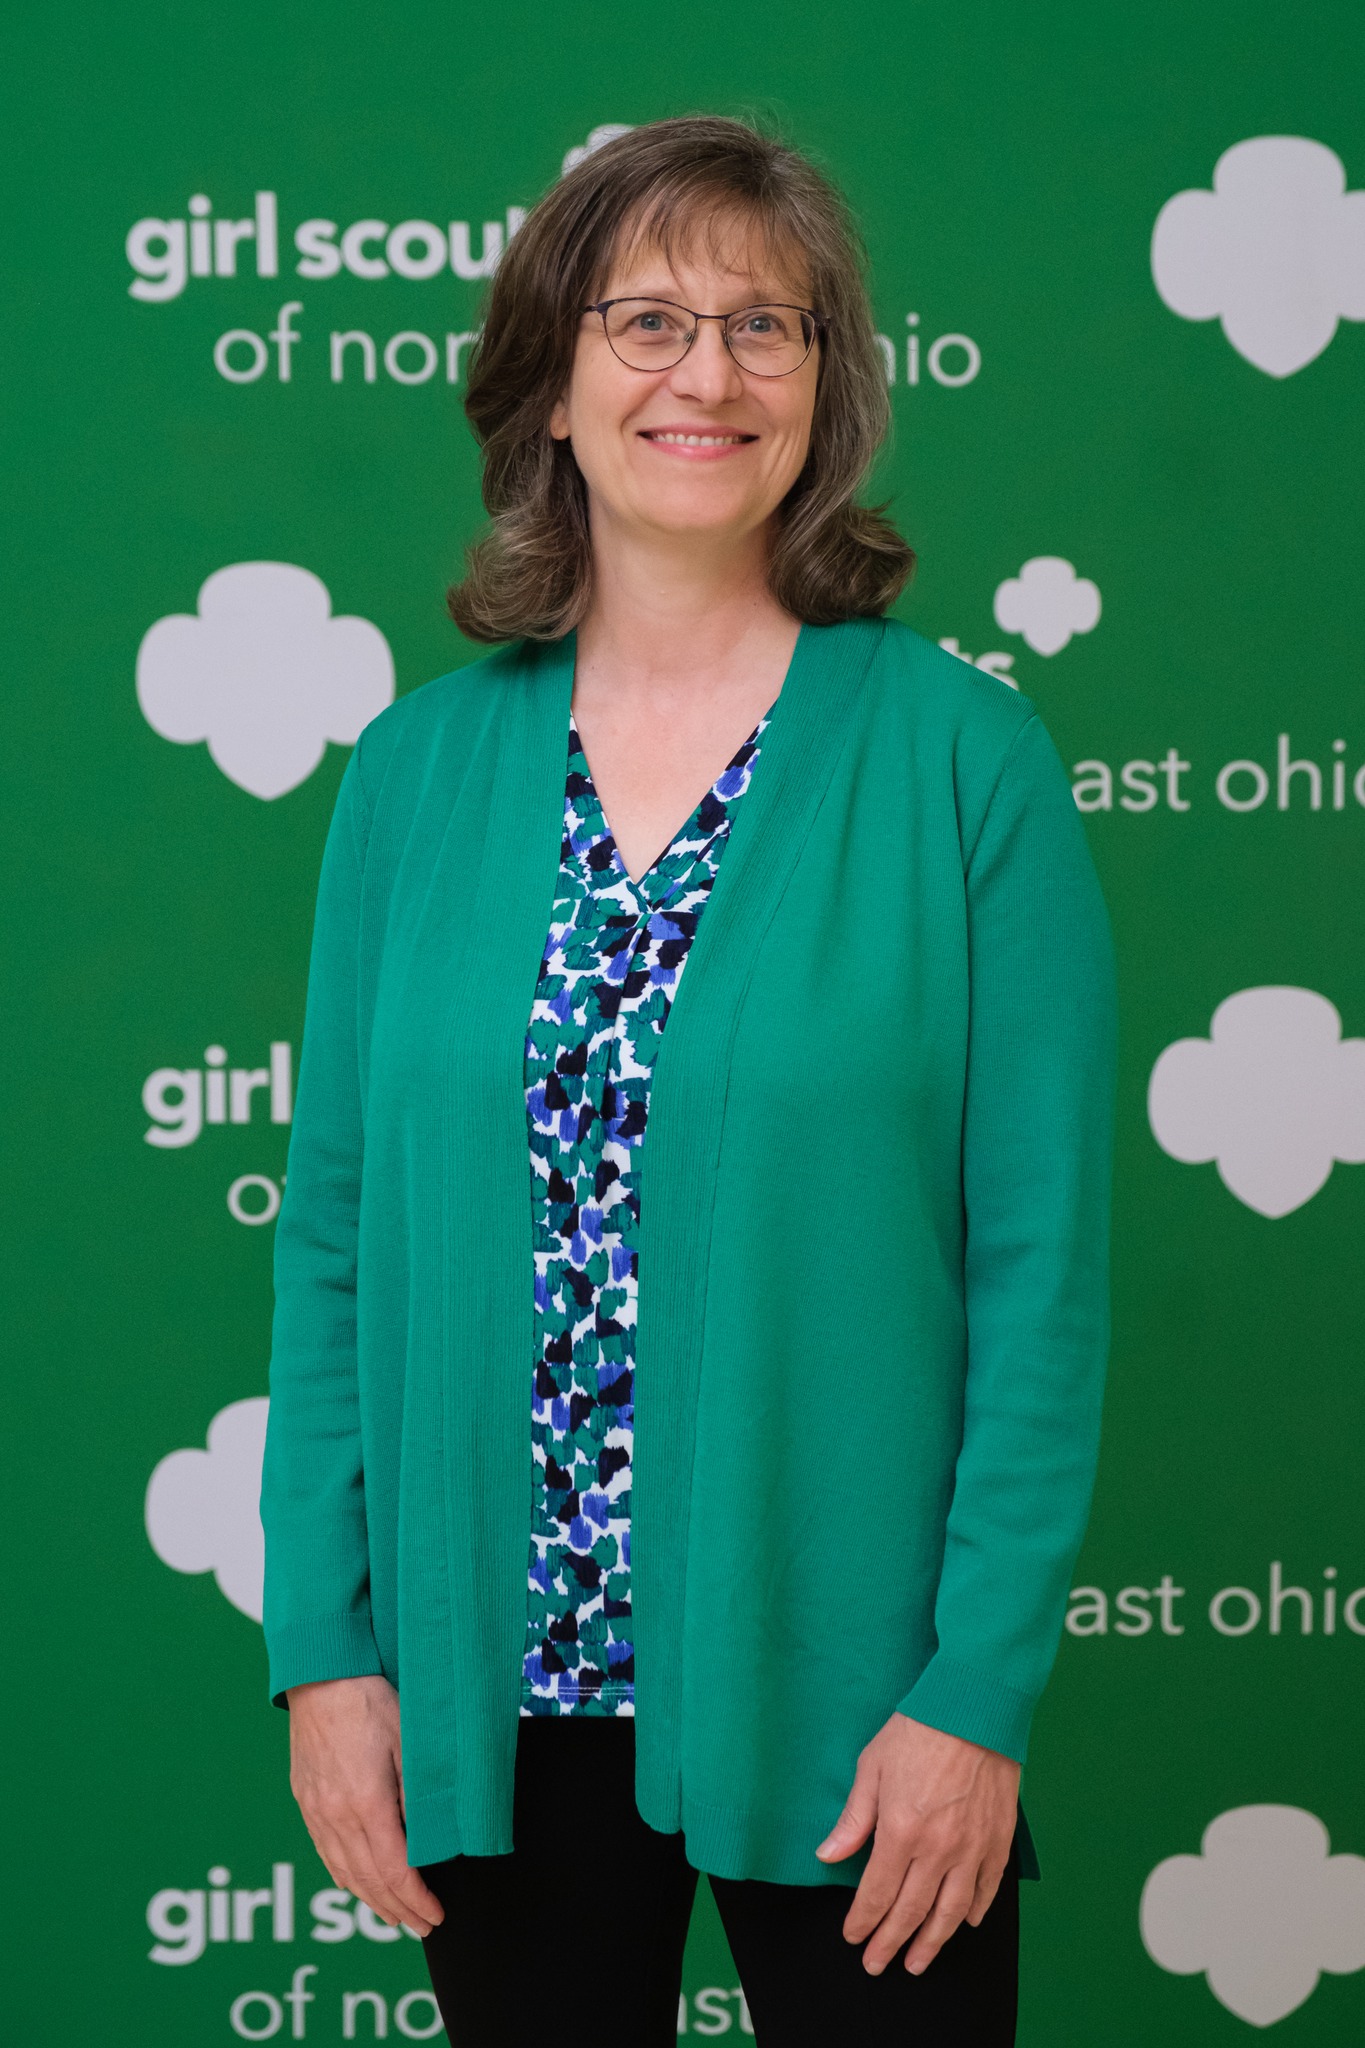 A woman wearing glasses and a blue patterned shirt and green sweater smiles at the camera as she stands in front of a green banner that says, “Girl Scouts of North East Ohio.”